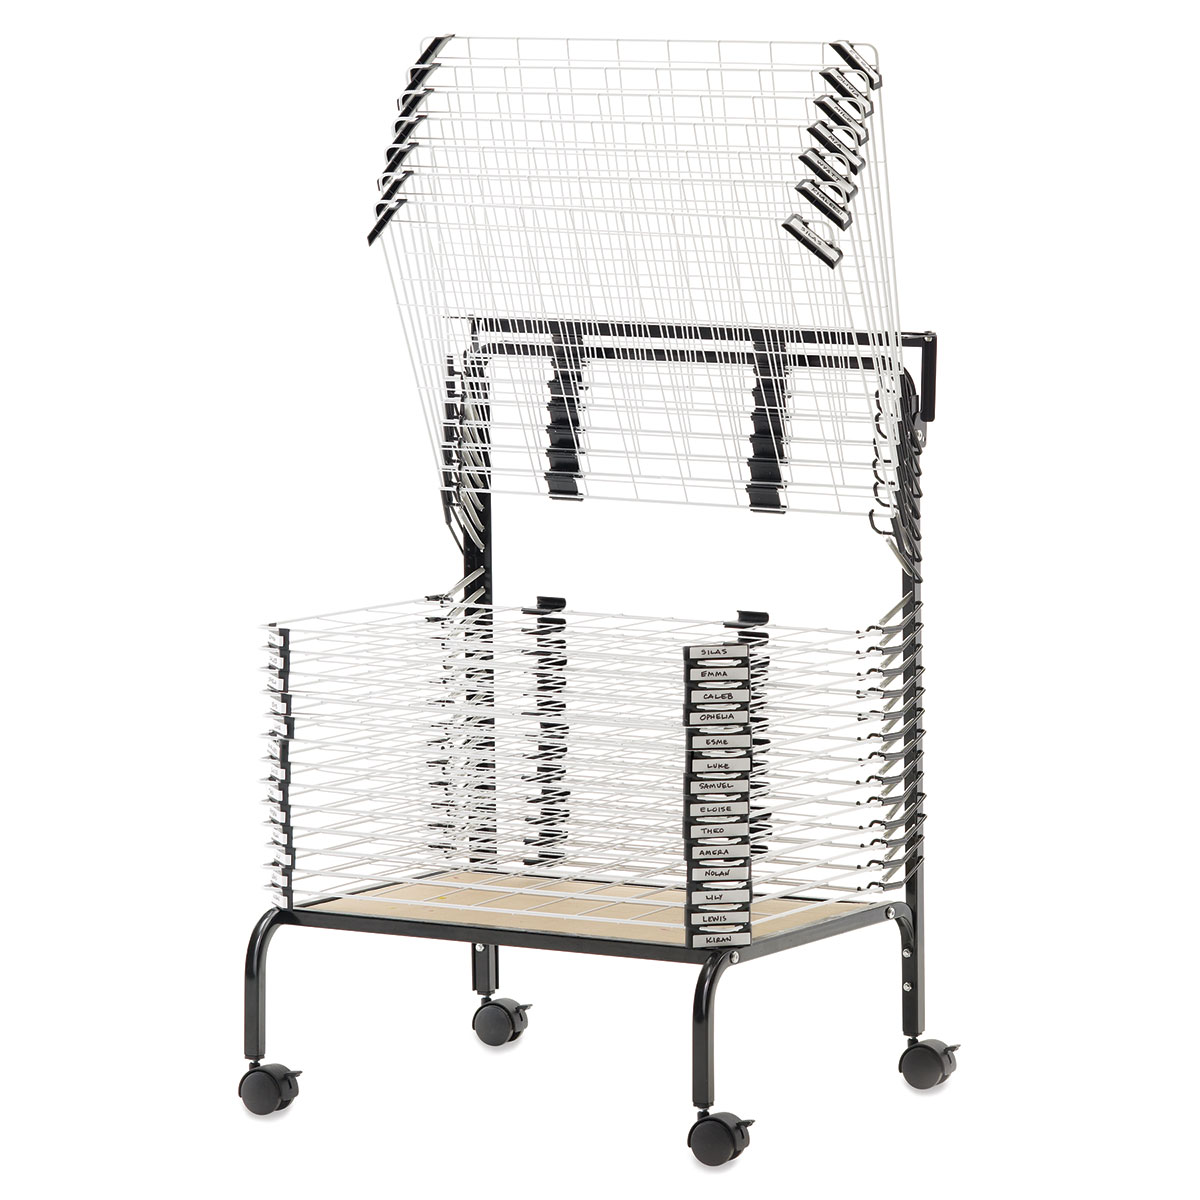 Copernicus Educational Product - PDR21 - Drying Rack - Wall-Mount